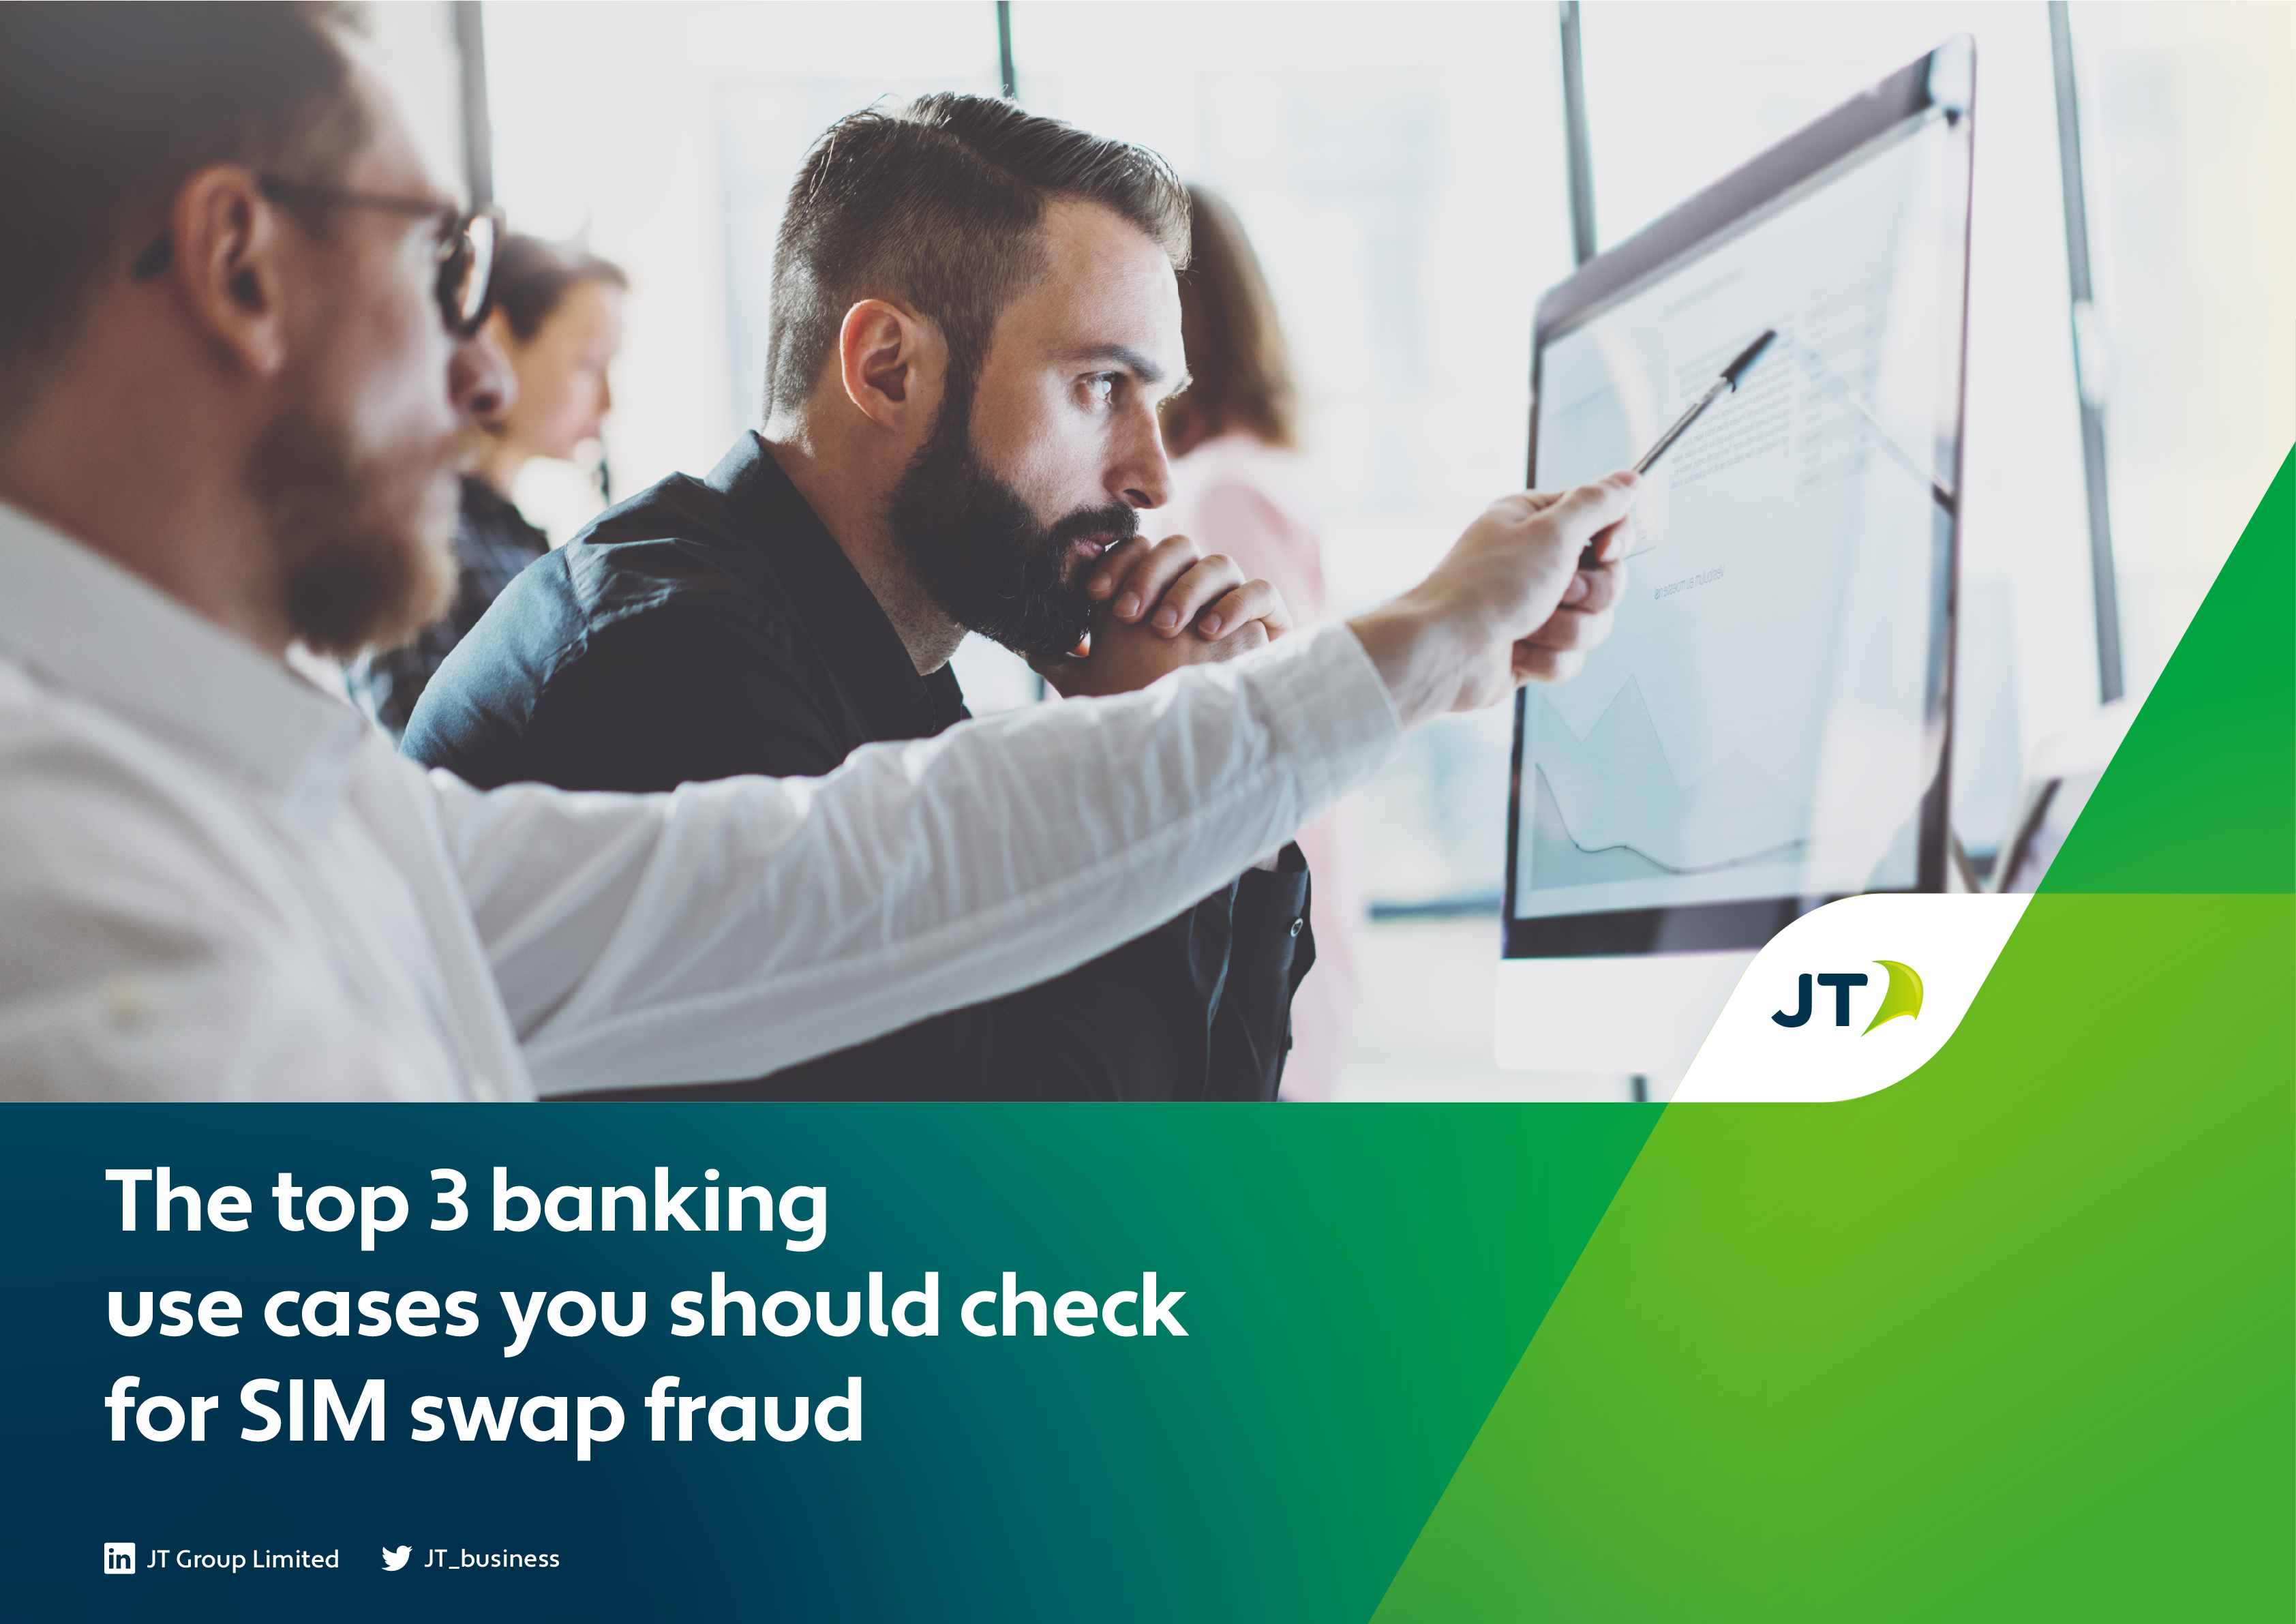 JT_Top 3 banking use cases you should check SIM swap fraud_eBook